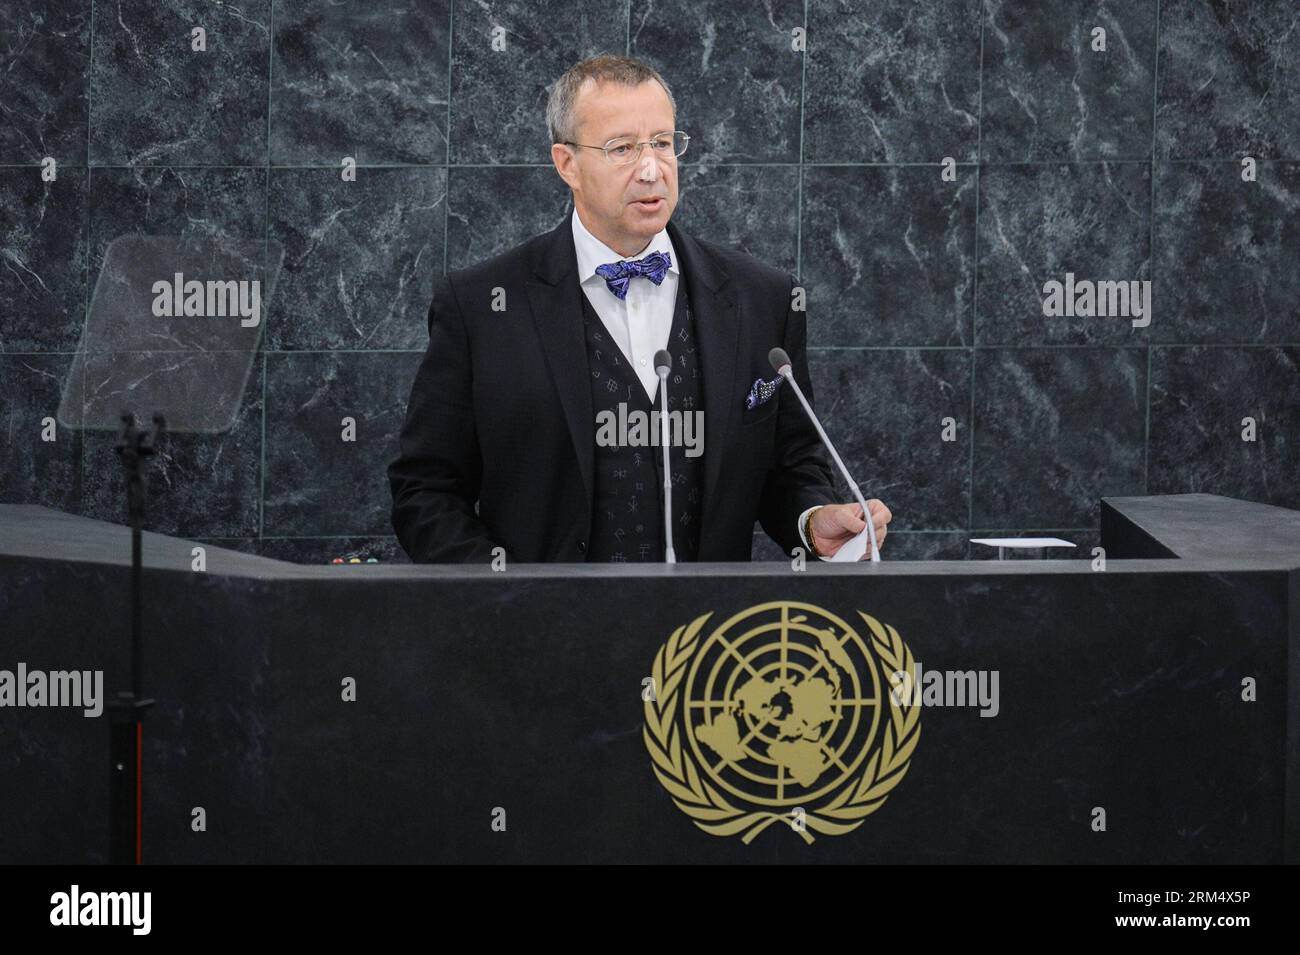 Bildnummer: 60526341  Datum: 25.09.2013  Copyright: imago/Xinhua Estonia s President Toomas Hendrik Ilves speaks during the general debate of the 68th session of the United Nations General Assembly at the UN headquarters in New York, on Sept. 25, 2013. It is the second day of the general debate. (Xinhua/Niu Xiaolei) (dzl) UN-GENERAL ASSEMBLY-GENERAL DEBATE PUBLICATIONxNOTxINxCHN People Politik Generalversammlung UN UNO xcb x0x 2013 quer premiumd     60526341 Date 25 09 2013 Copyright Imago XINHUA Estonia S President Toomas Hendrik Ilves Speaks during The General Debate of The 68th Session of T Stock Photo